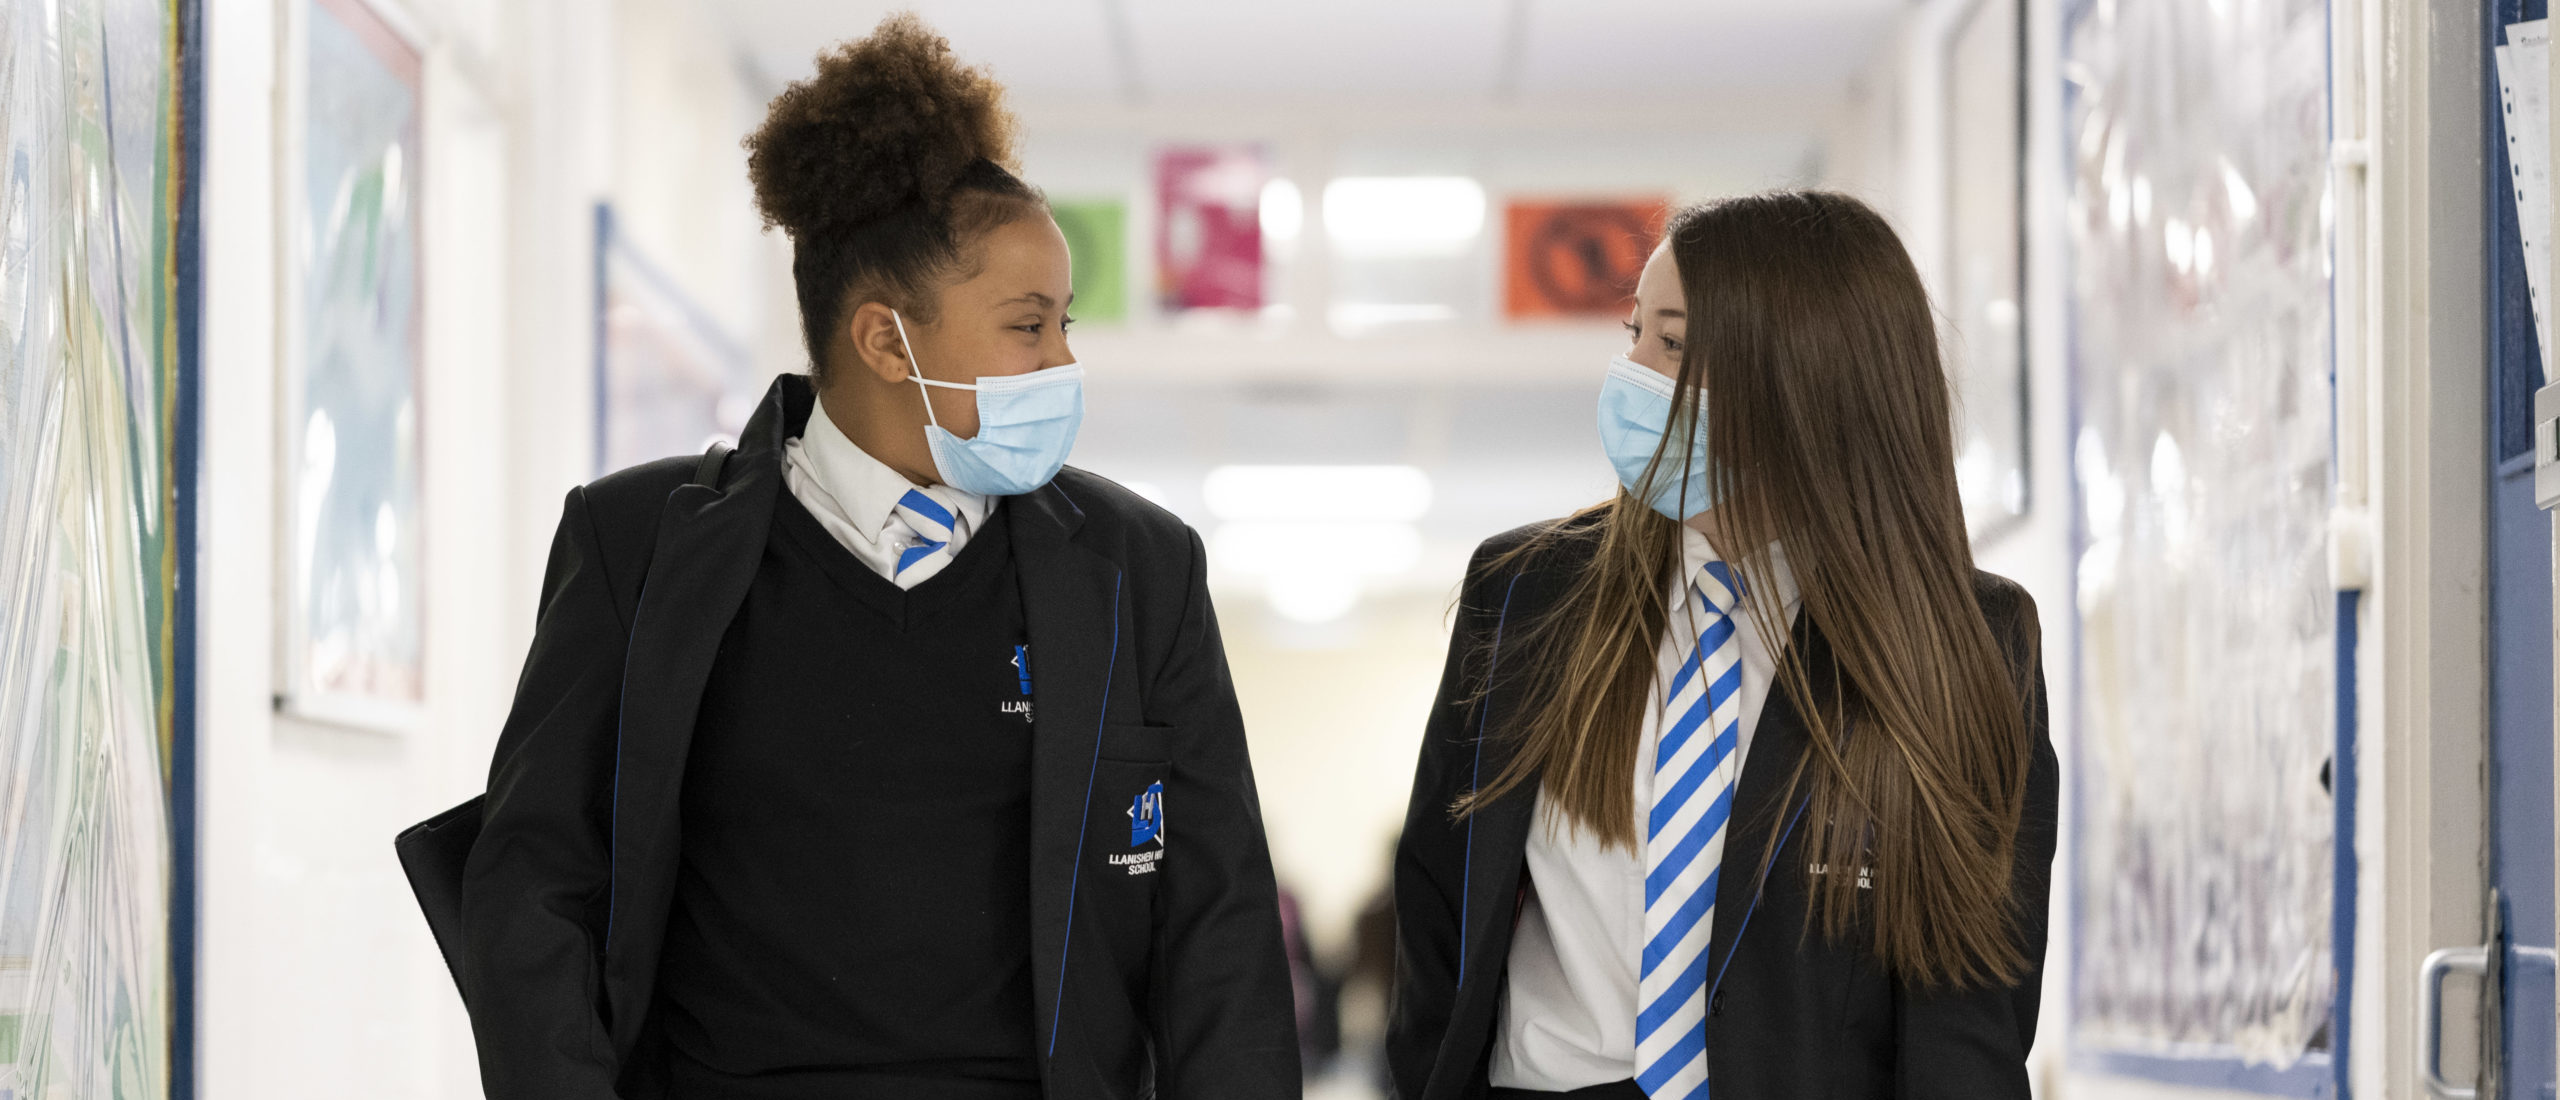 CARDIFF, WALES - SEPTEMBER 20: Children wearing face masks walk down a corridor at Llanishen High School on September 20, 2021 in Cardiff, Wales. All children aged 12 to 15 across the UK will be offered a dose of the Pfizer-BioNTech Covid-19 vaccine. Parental consent will be sought for the schools-based vaccination programme. (Photo by Matthew Horwood/Getty Images)